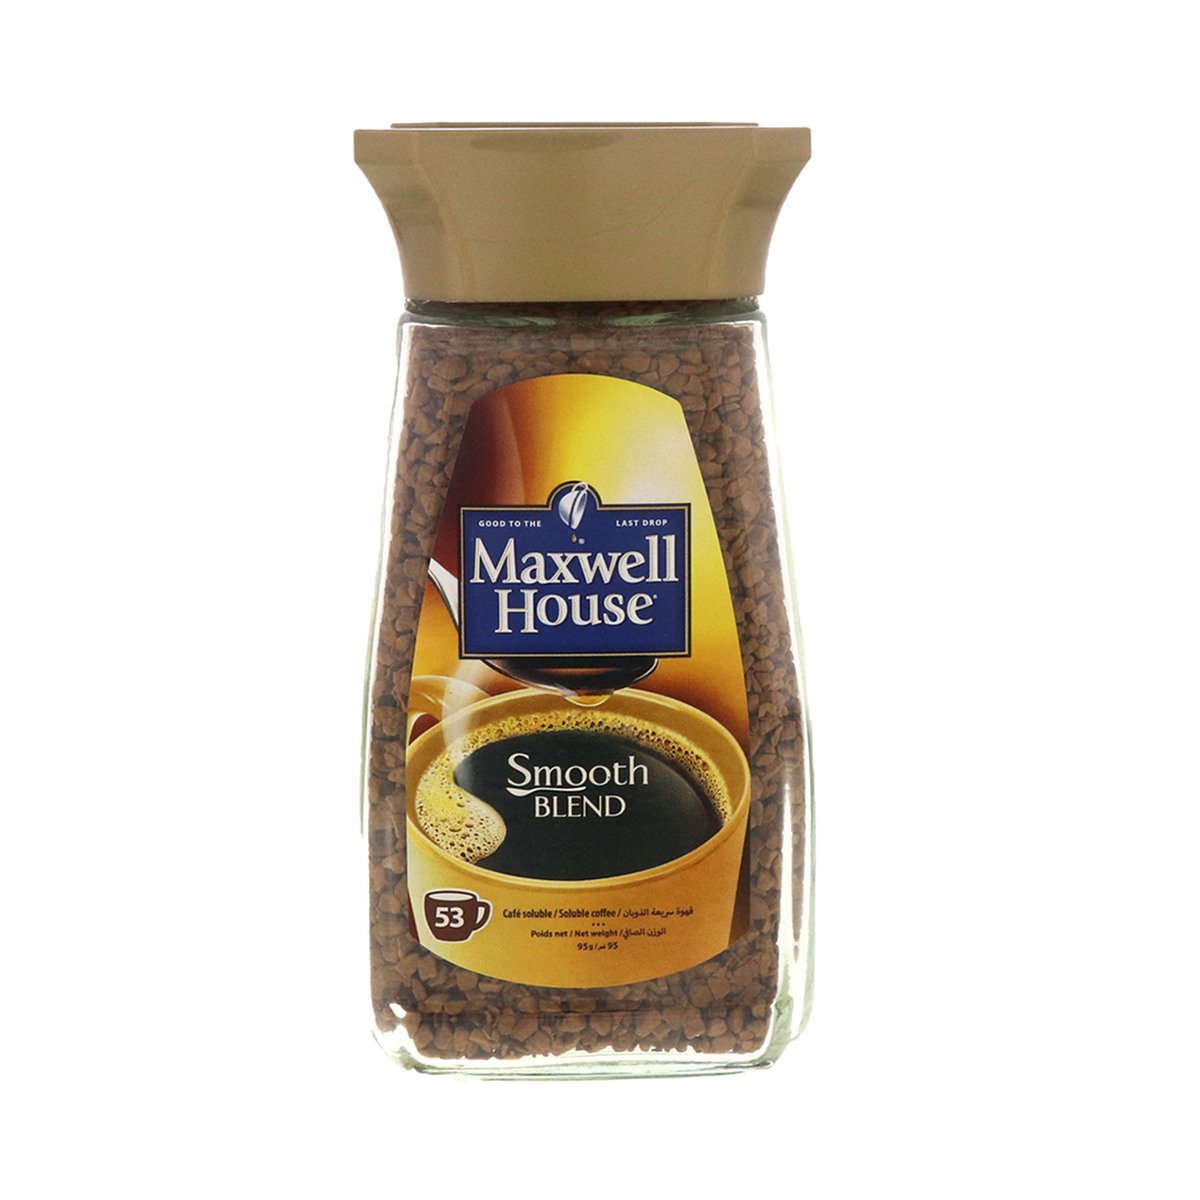 Maxwell house smooth blend coffee 95g